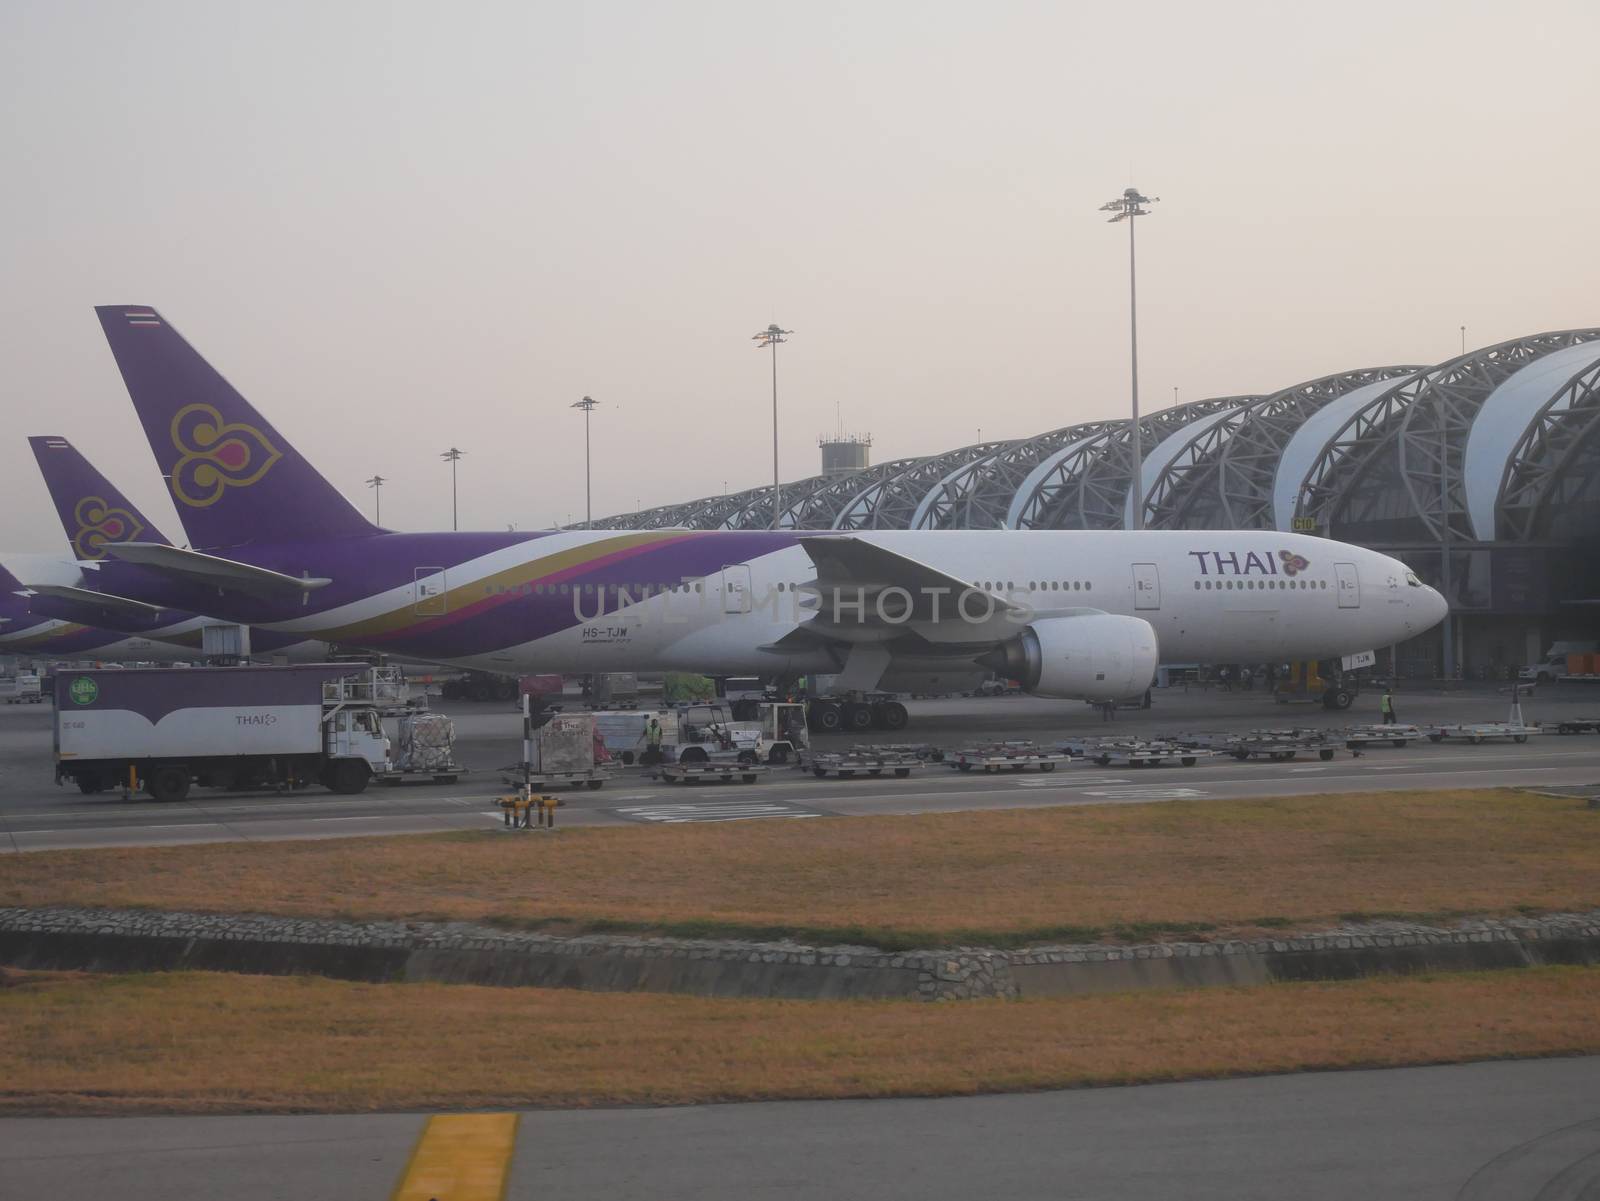 BANGKOK, THAILAND -12 MARCH 2017- Airplanes from Thai Airways (TG), the flag carrier of Thailand and a member of Star Alliance, are parked at their hub at the Suvarnabhumi Airport (BKK) in Bangkok. by asiandelight